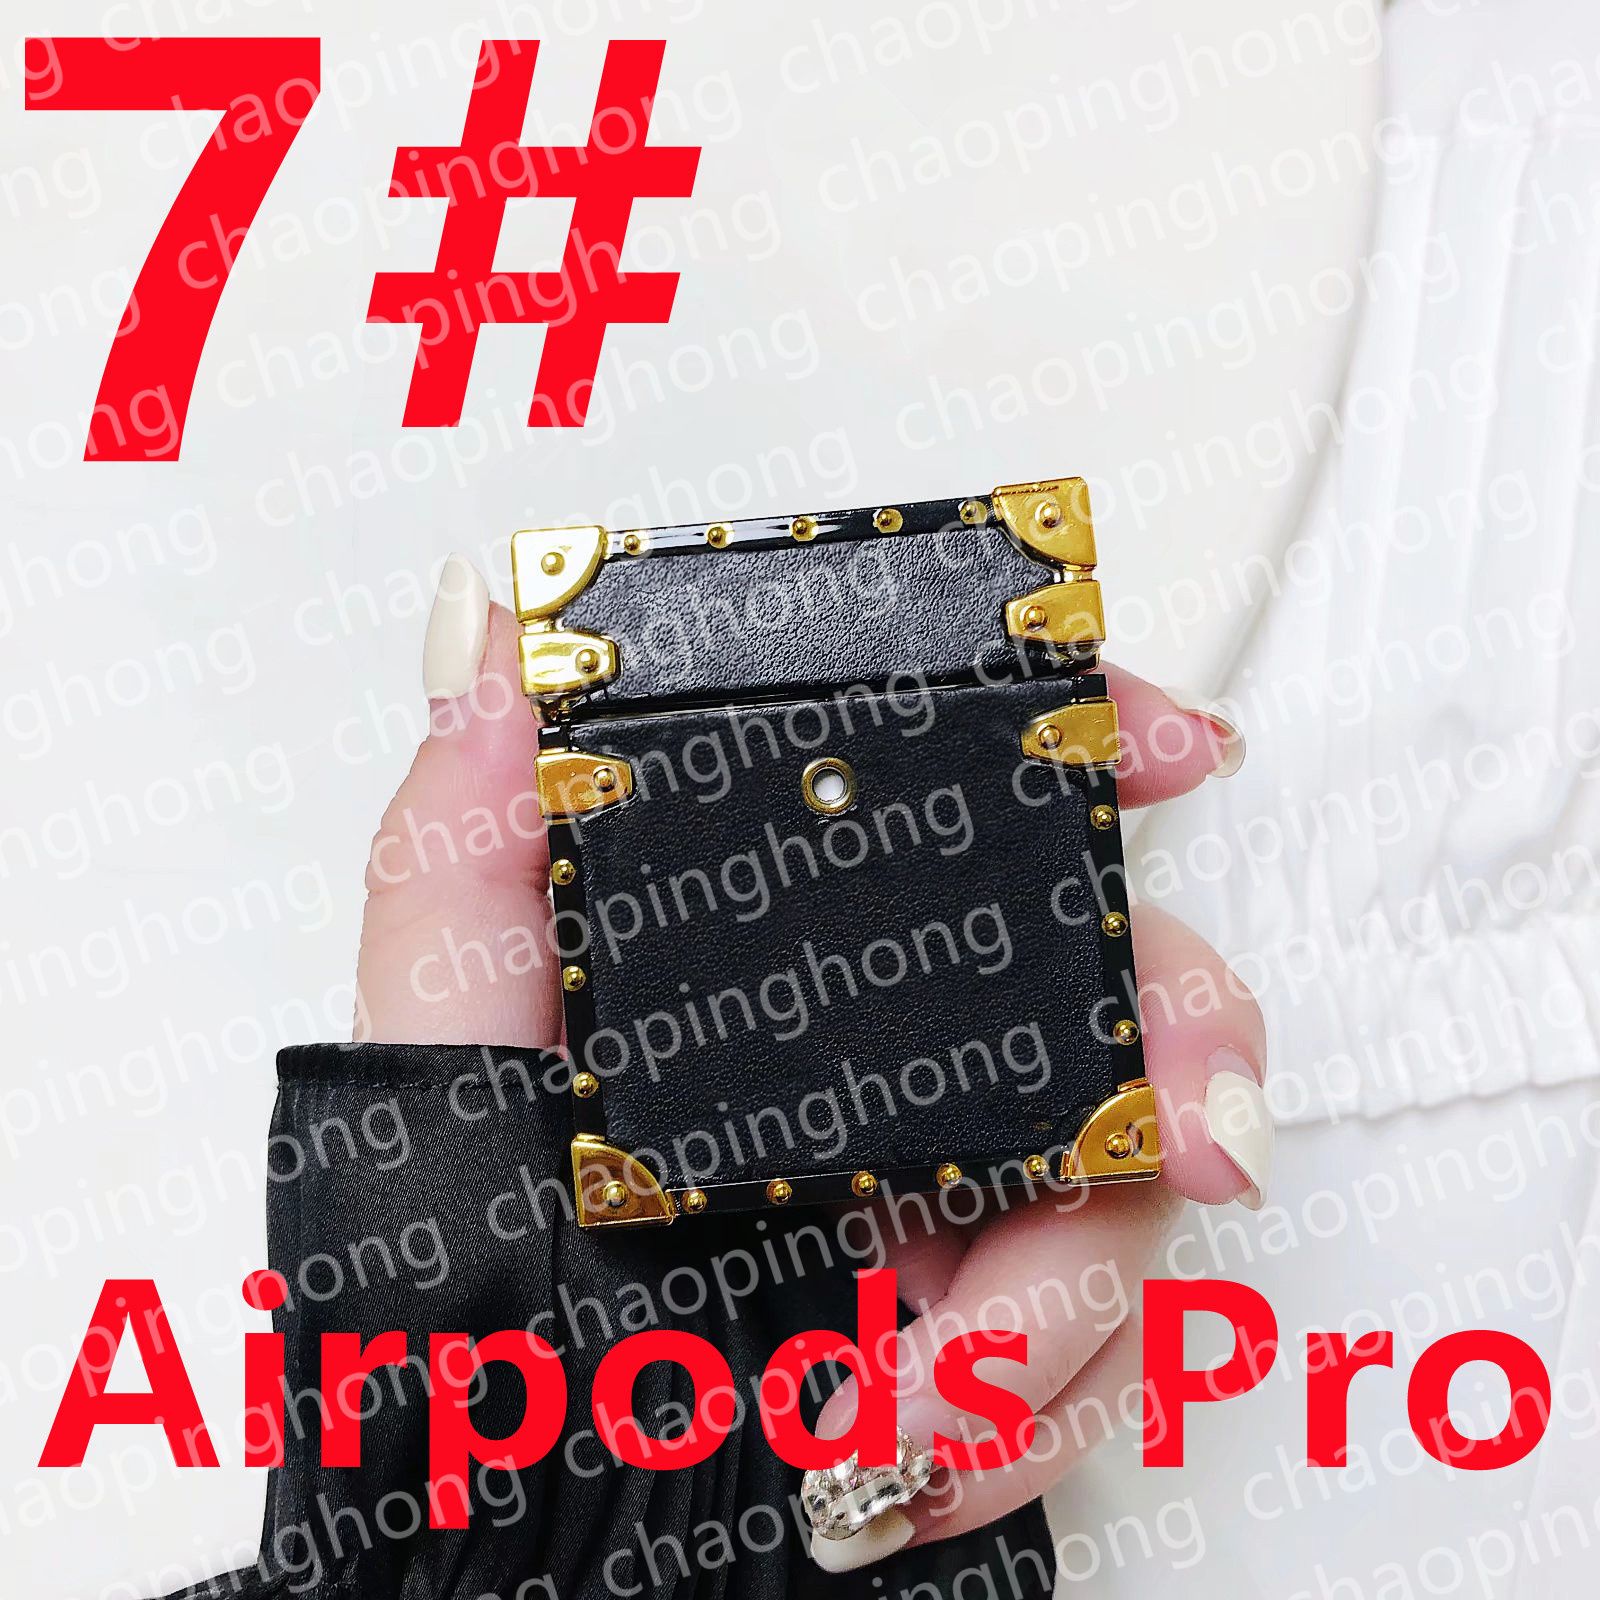 7 # [g] AirPods Pro + logo